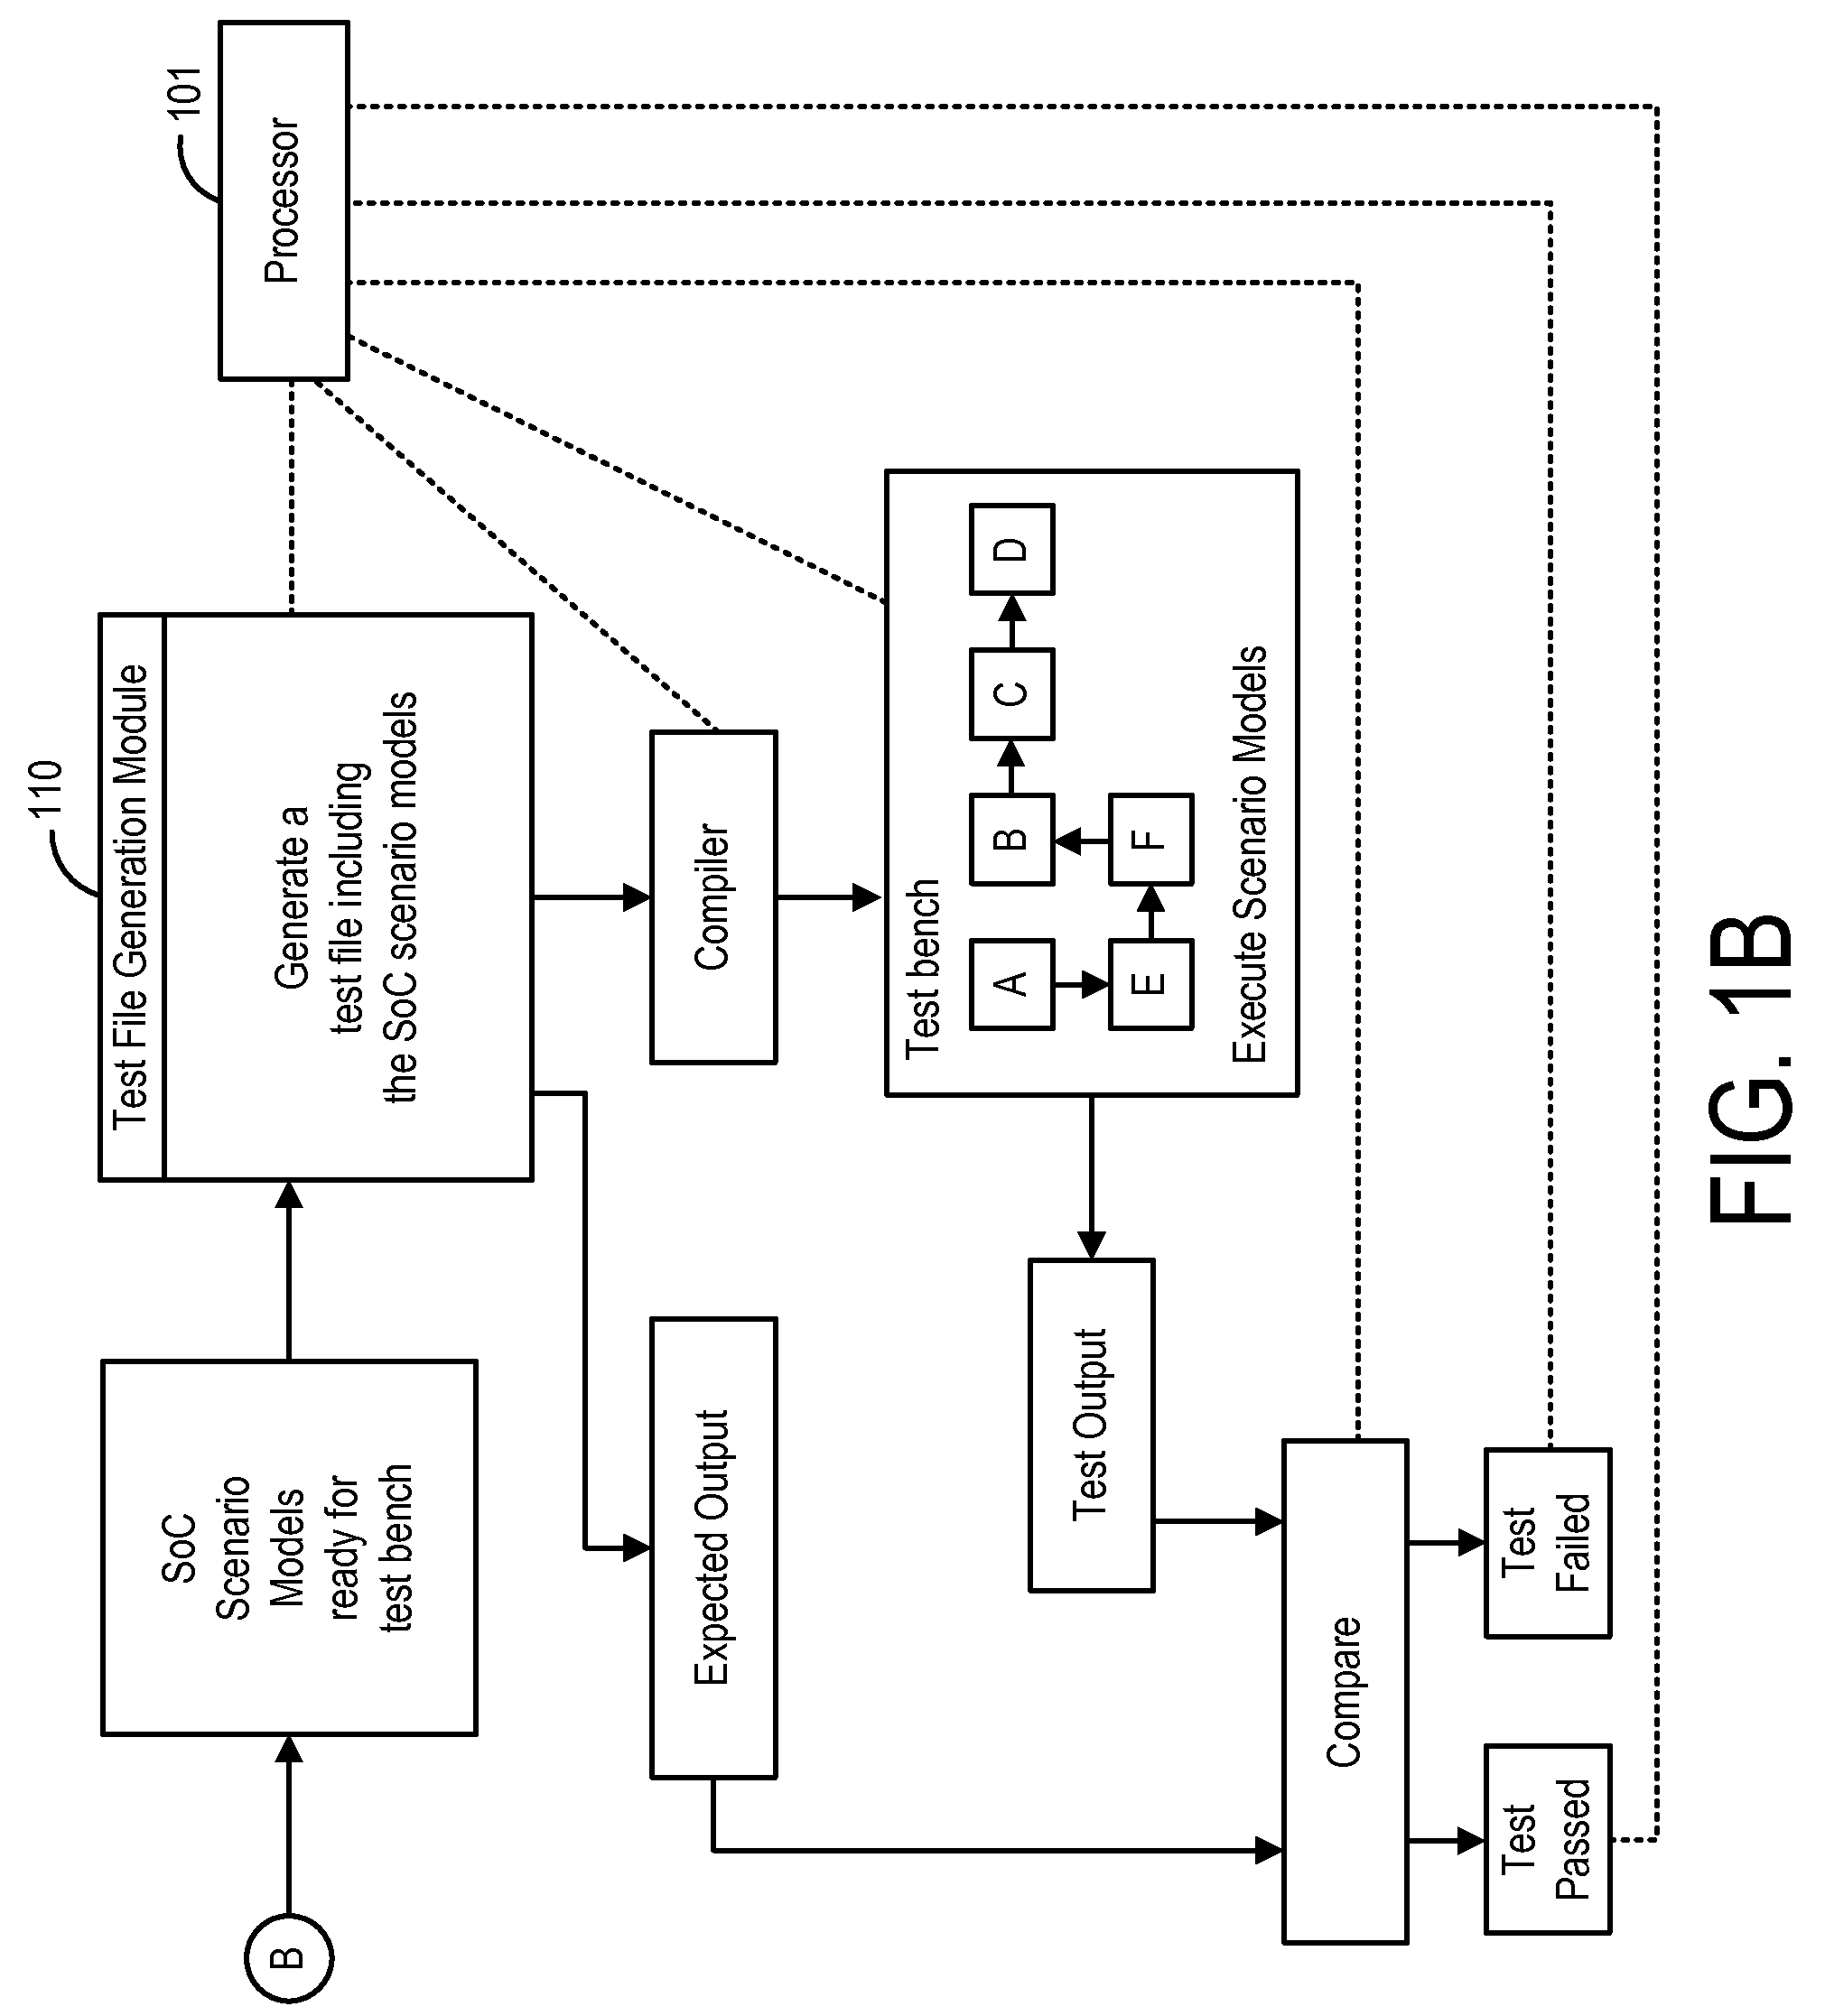 Scheduling of scenario models for execution within different computer threads and scheduling of memory regions for use with the scenario models